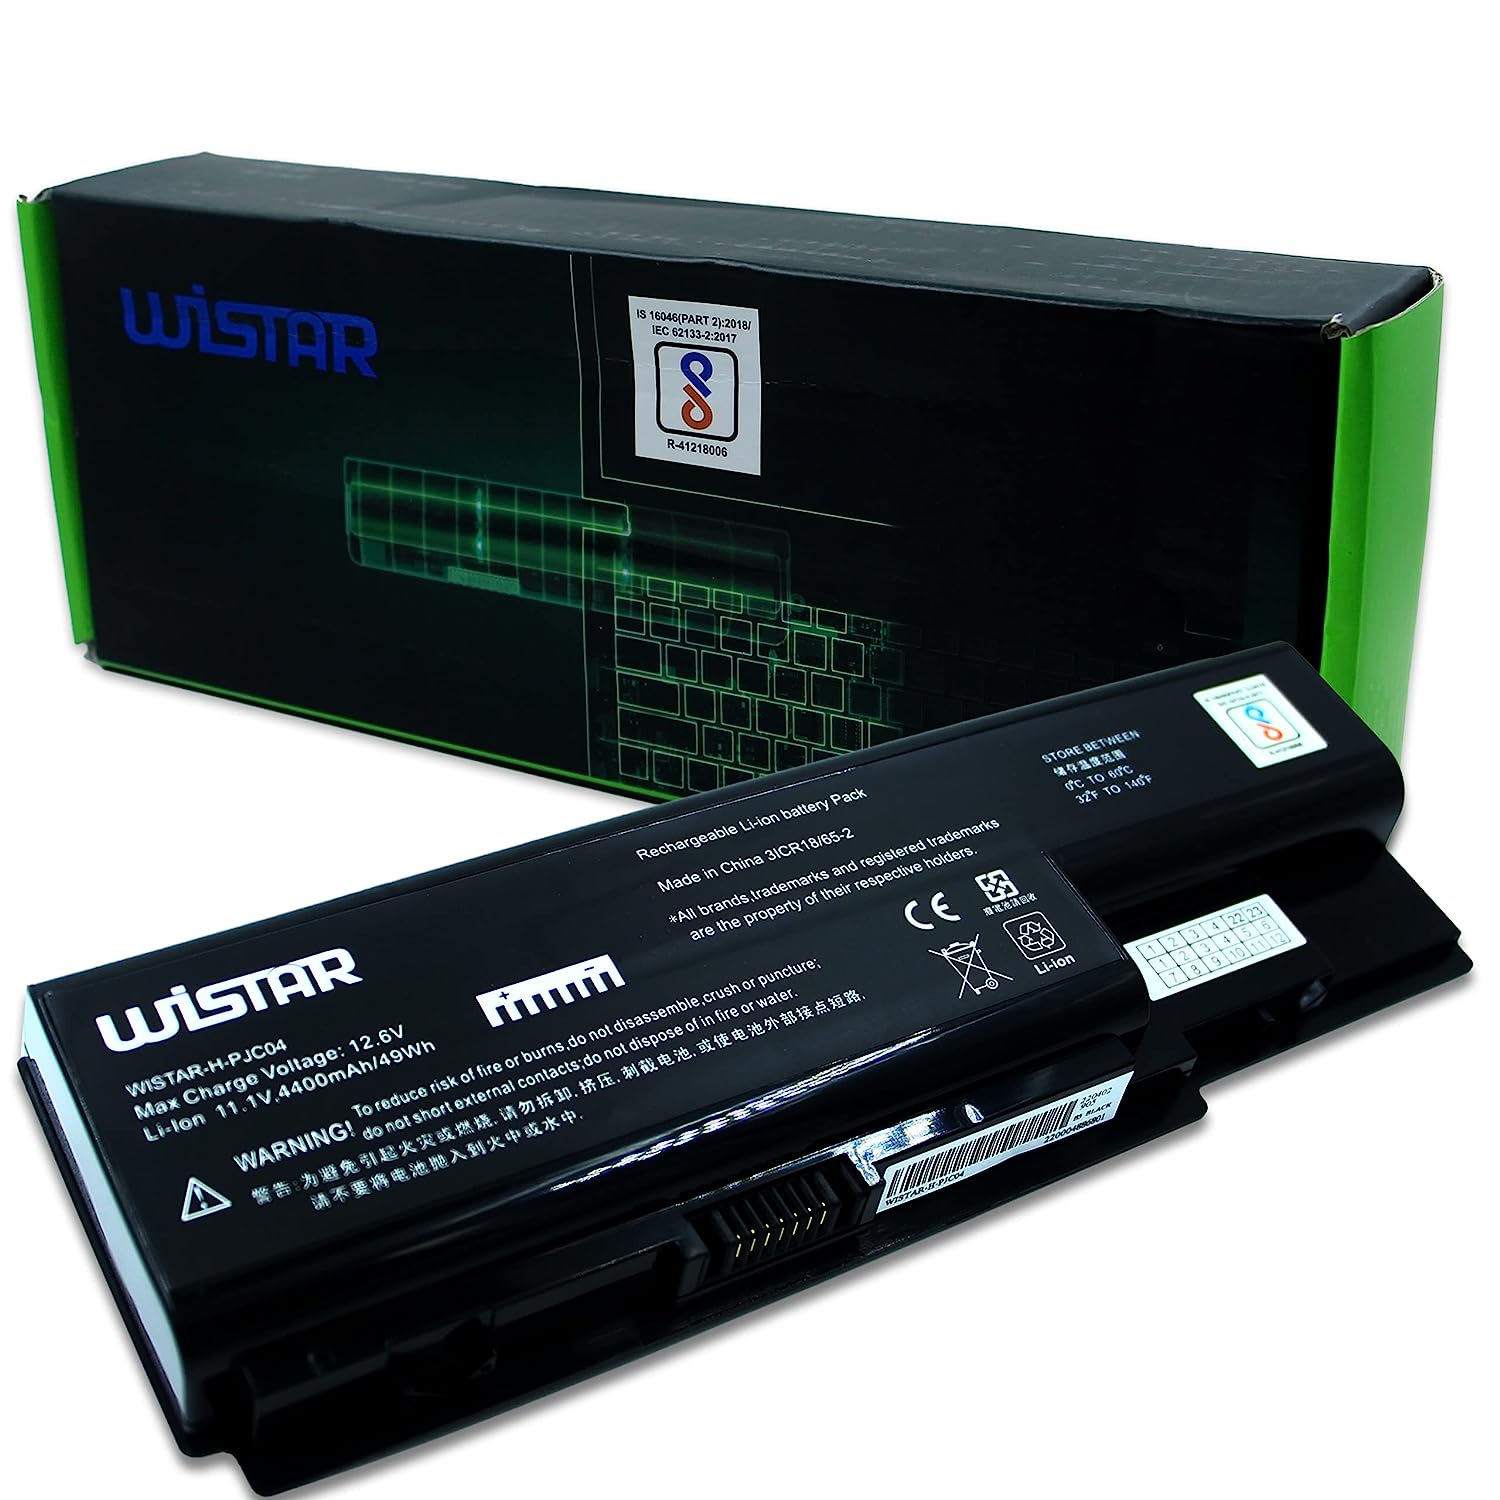 WISTAR Laptop Battery for ACER Aspire 5520 5720 5920 5930 6920 7230 7540 AS07B31 AS07B32 AS07B41 Black